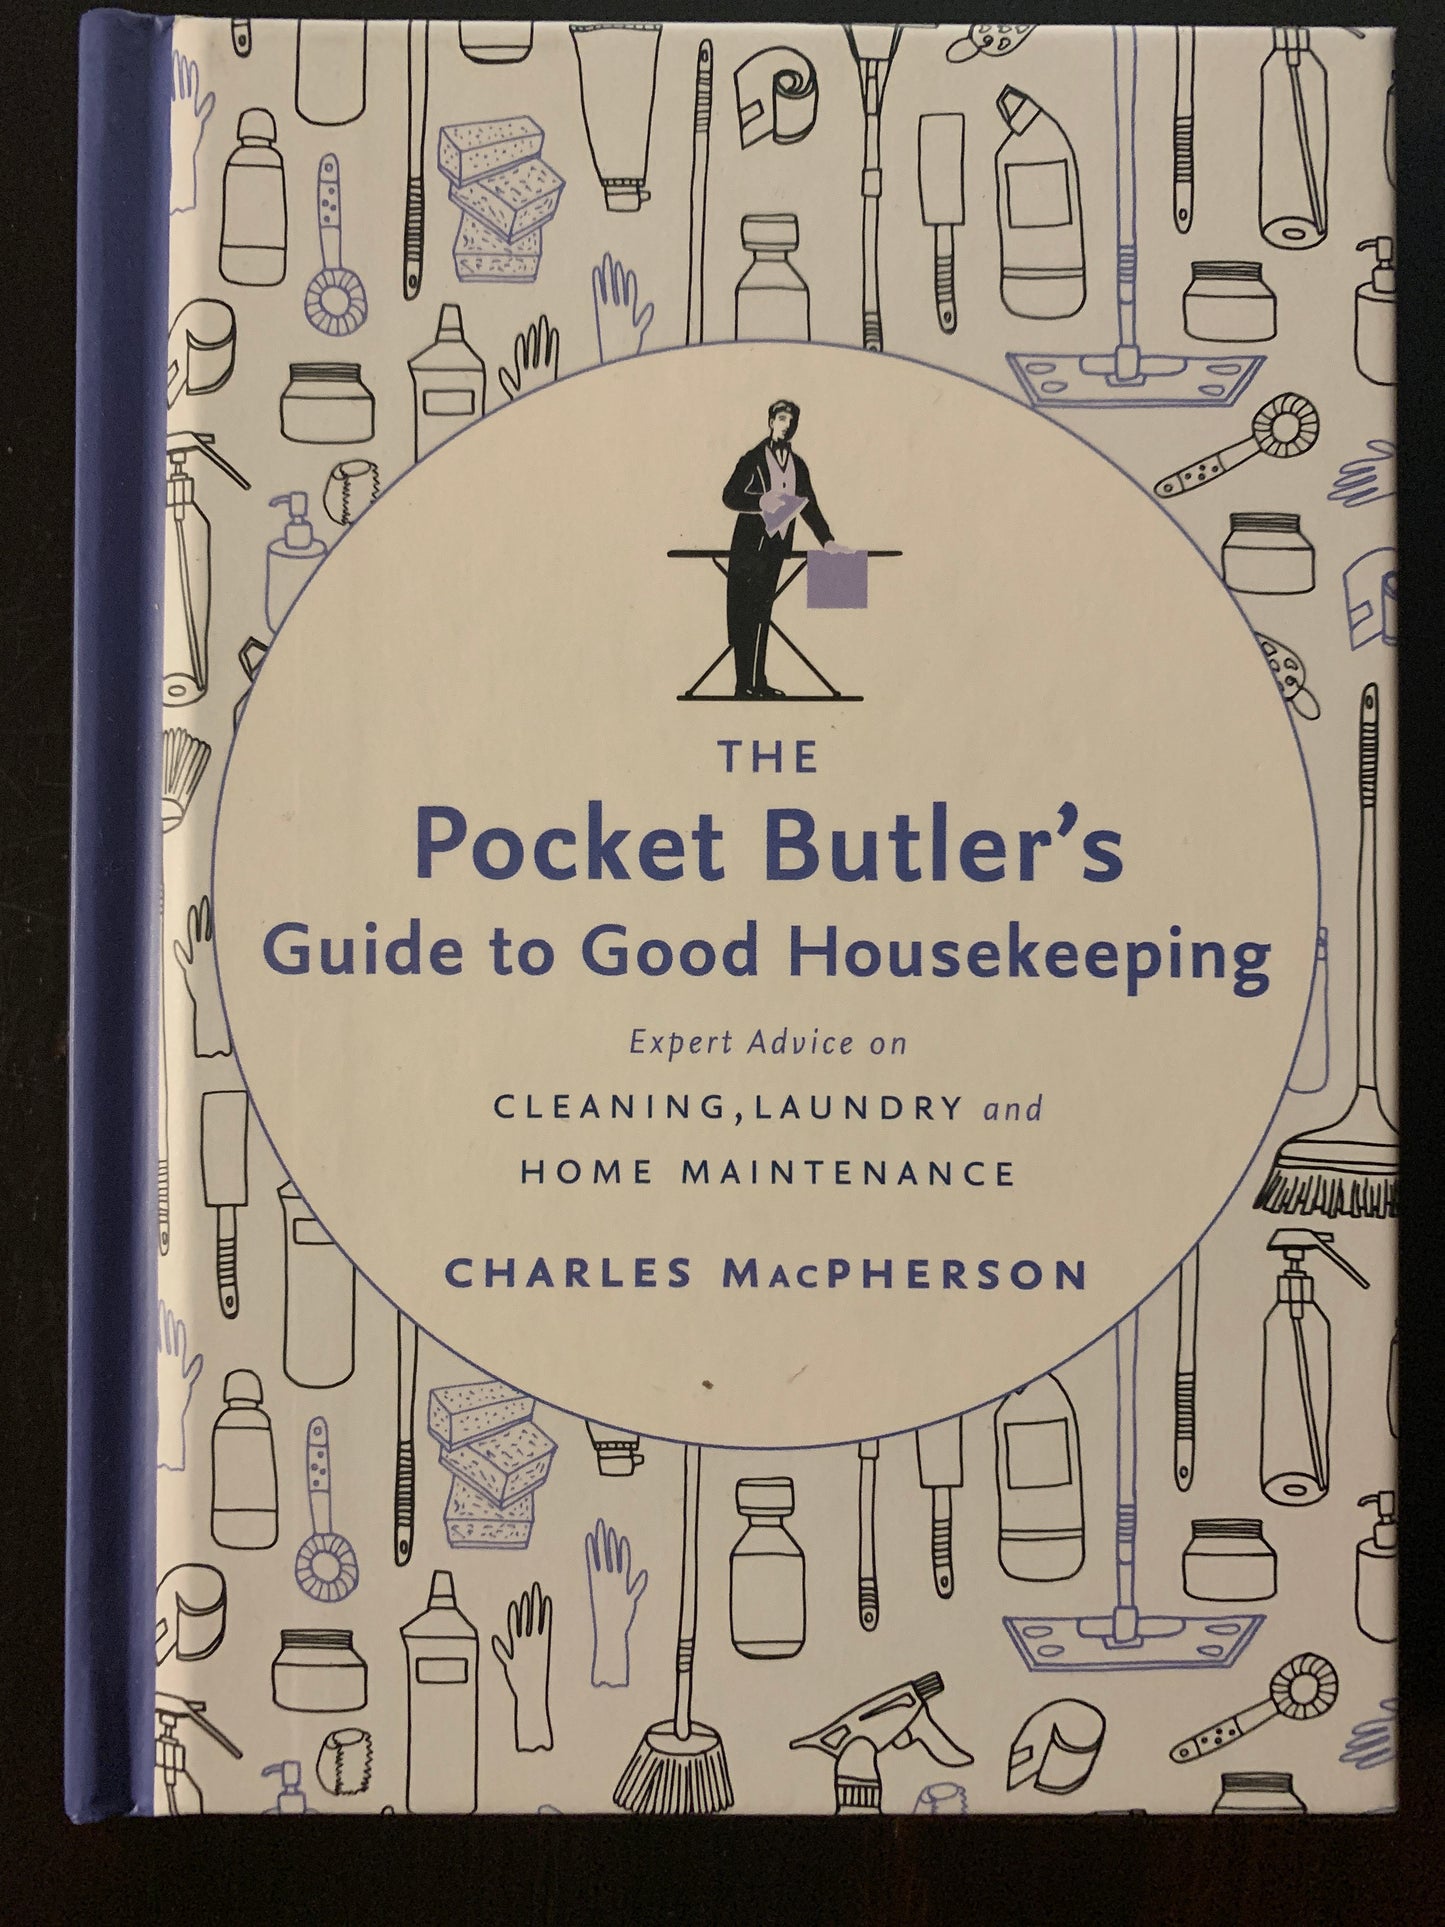 The Pocket Butler’s Guide to Good Housekeeping